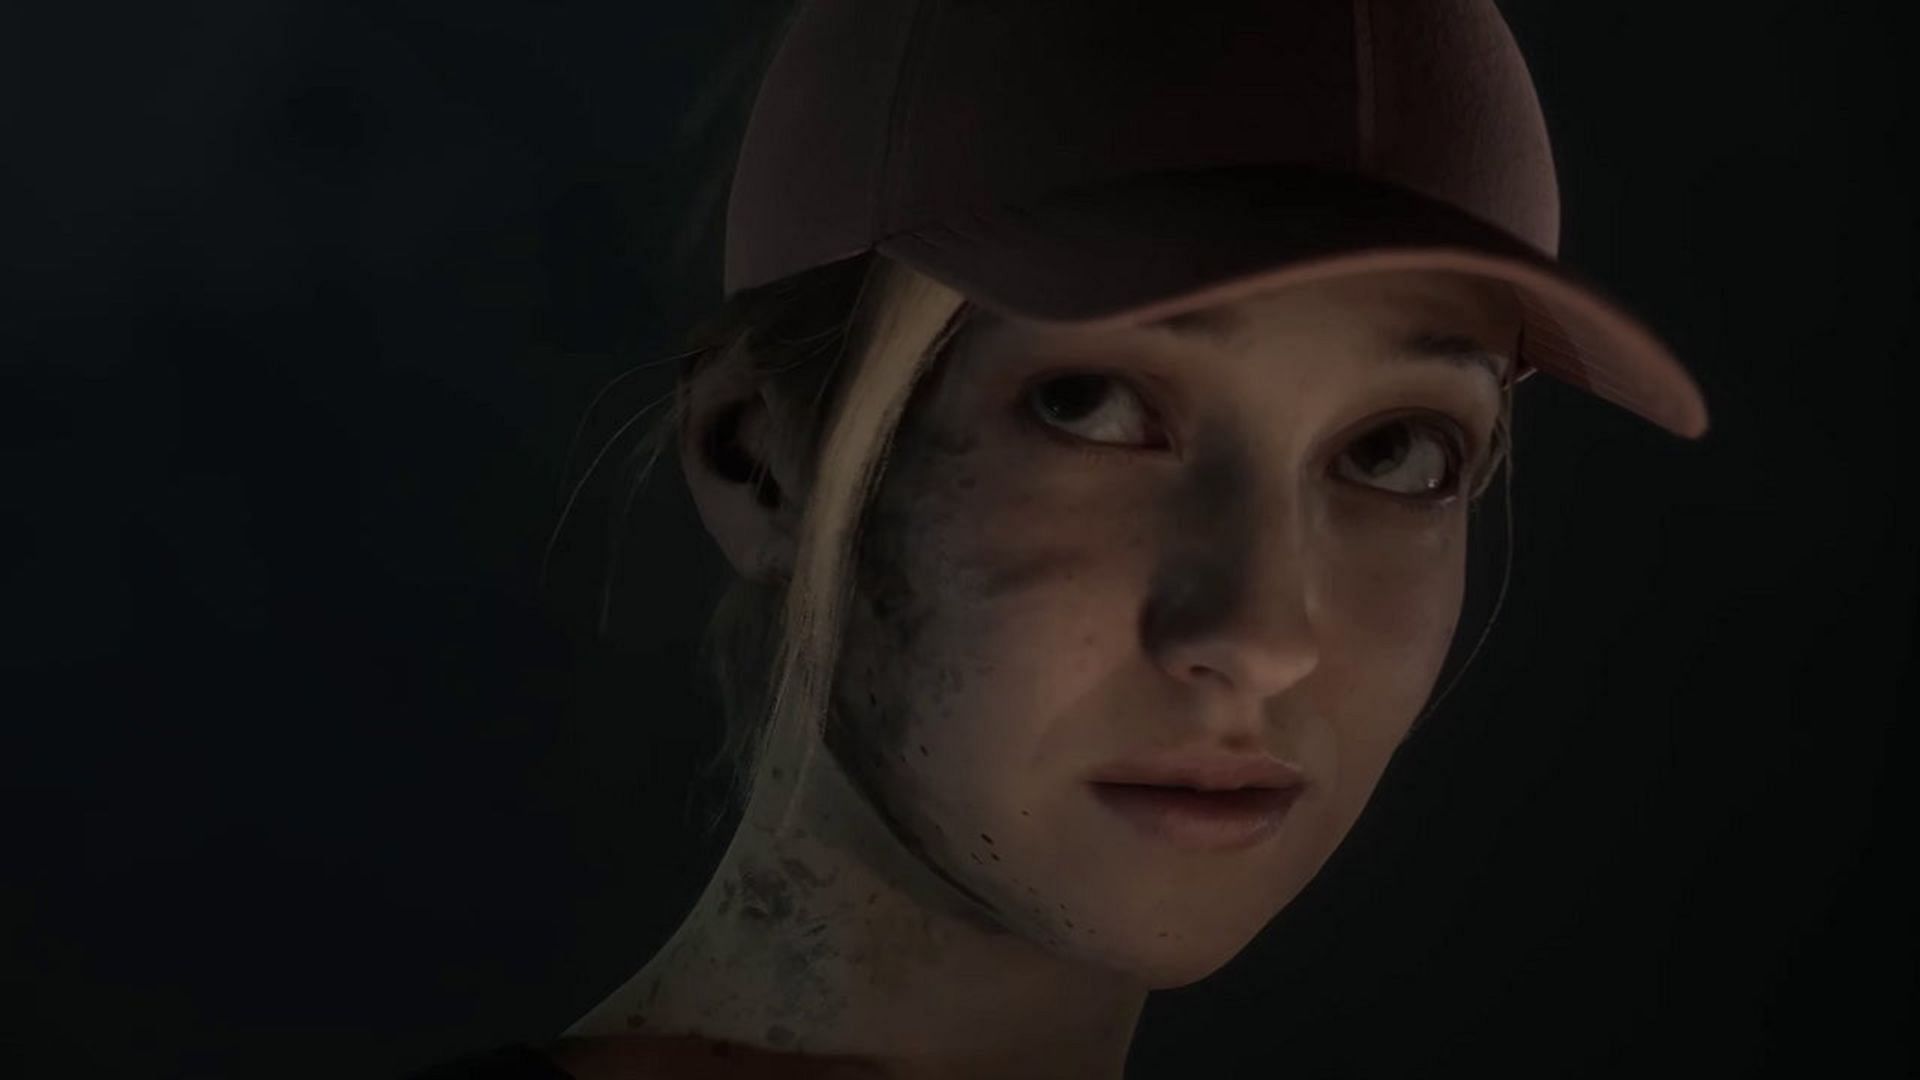 Laura from The Quarry (Image via 2K)